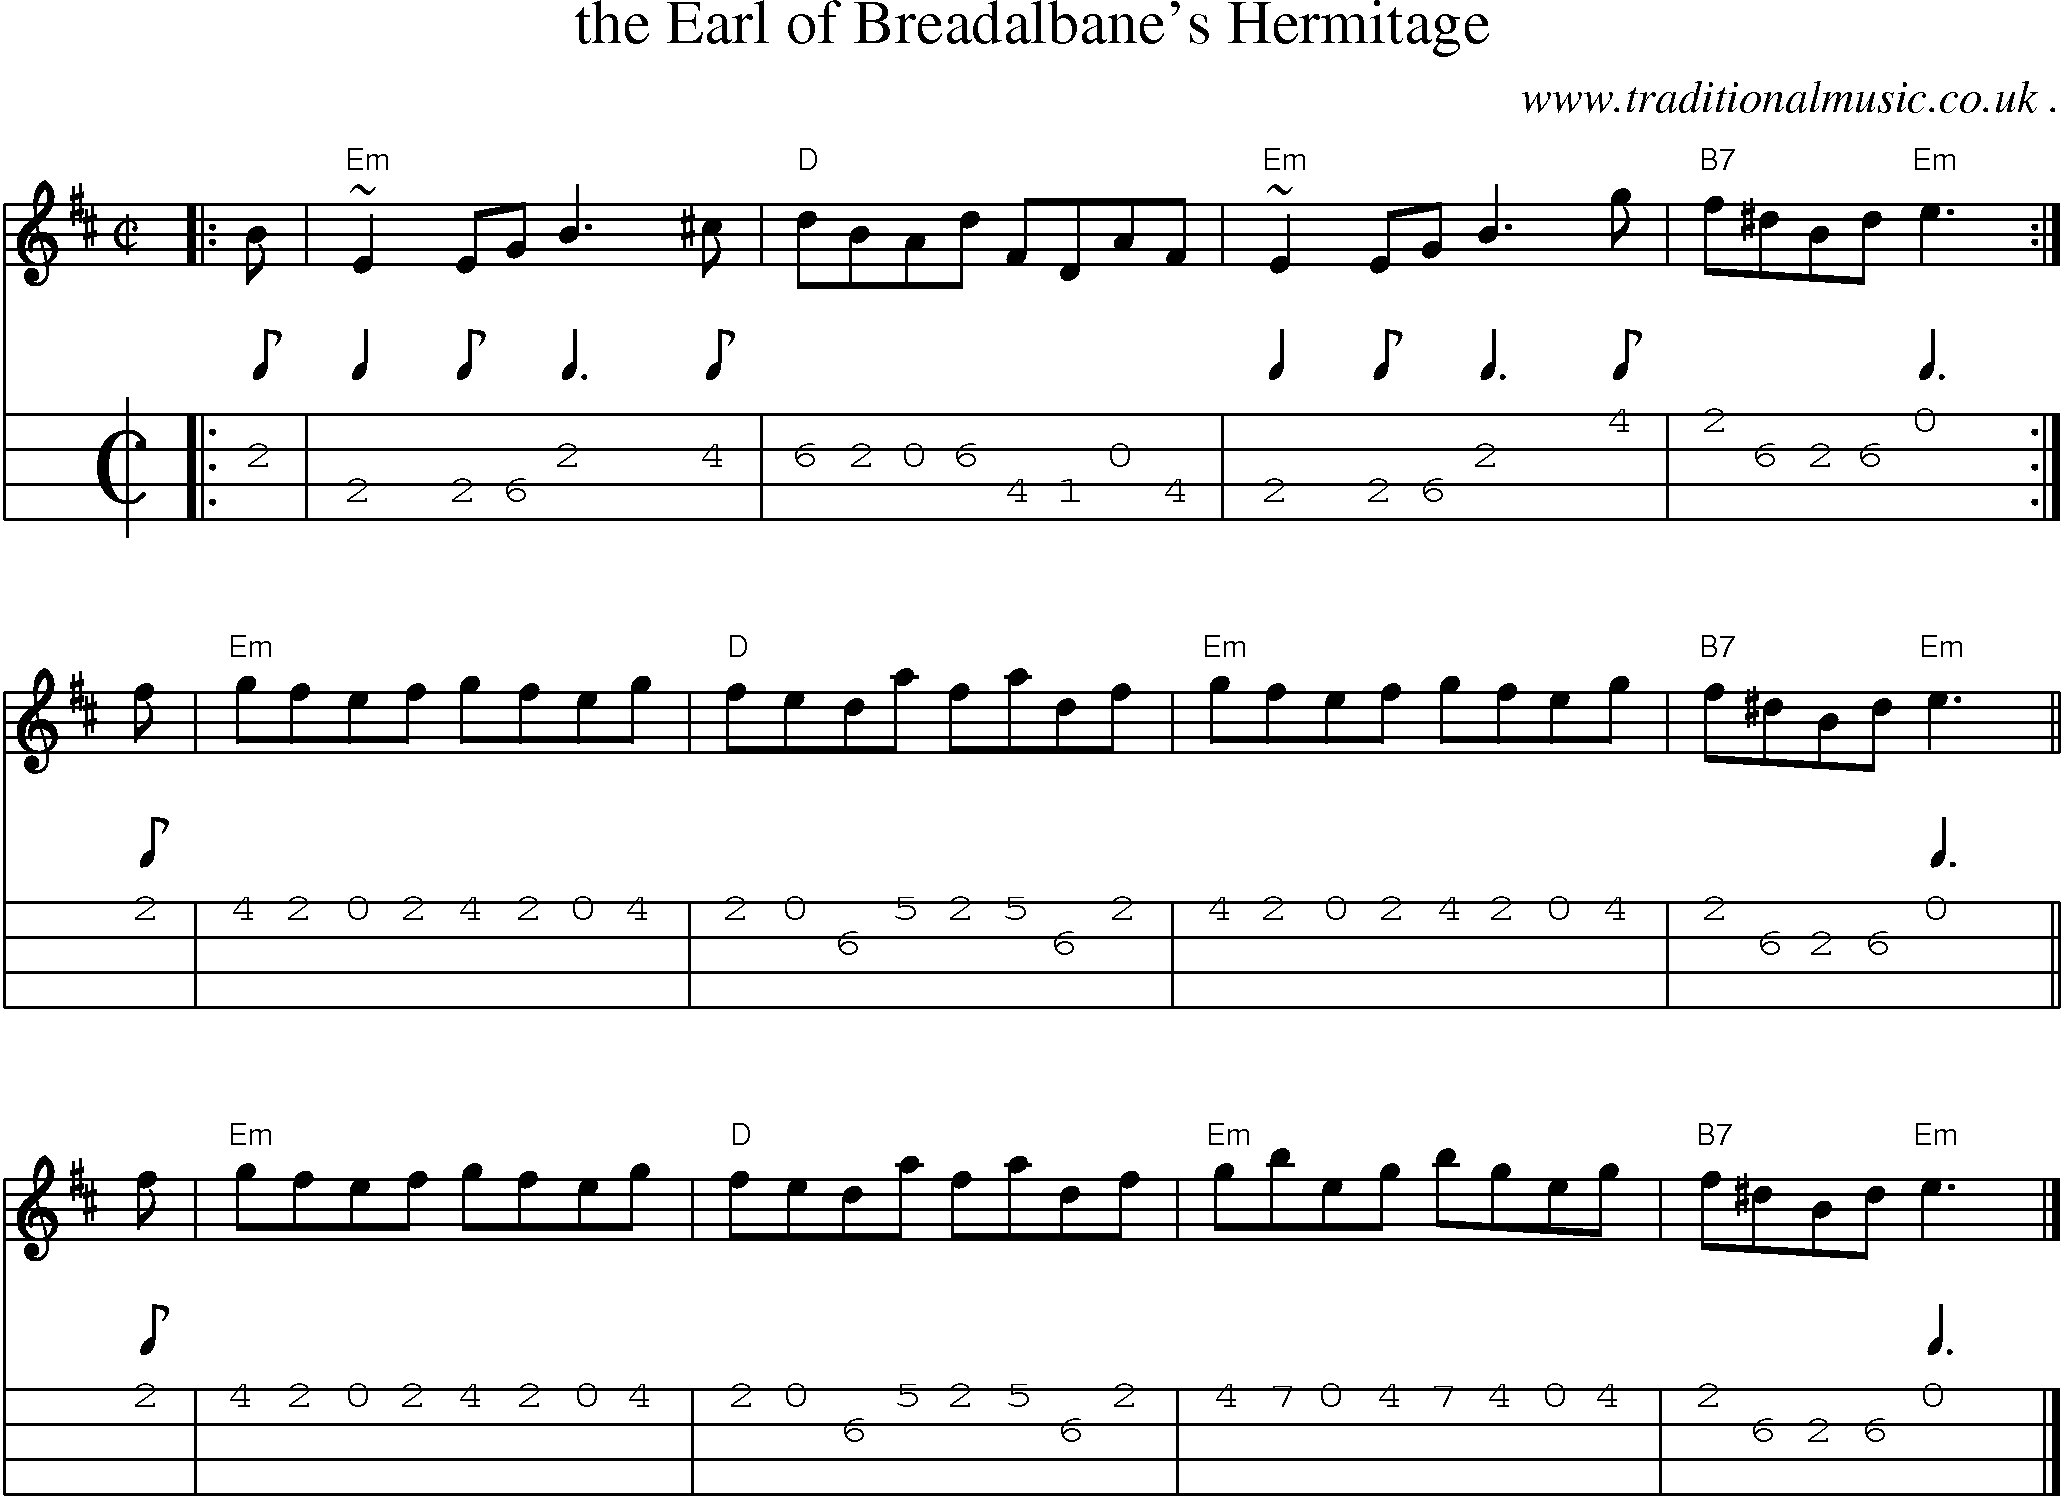 Sheet-music  score, Chords and Mandolin Tabs for The Earl Of Breadalbanes Hermitage